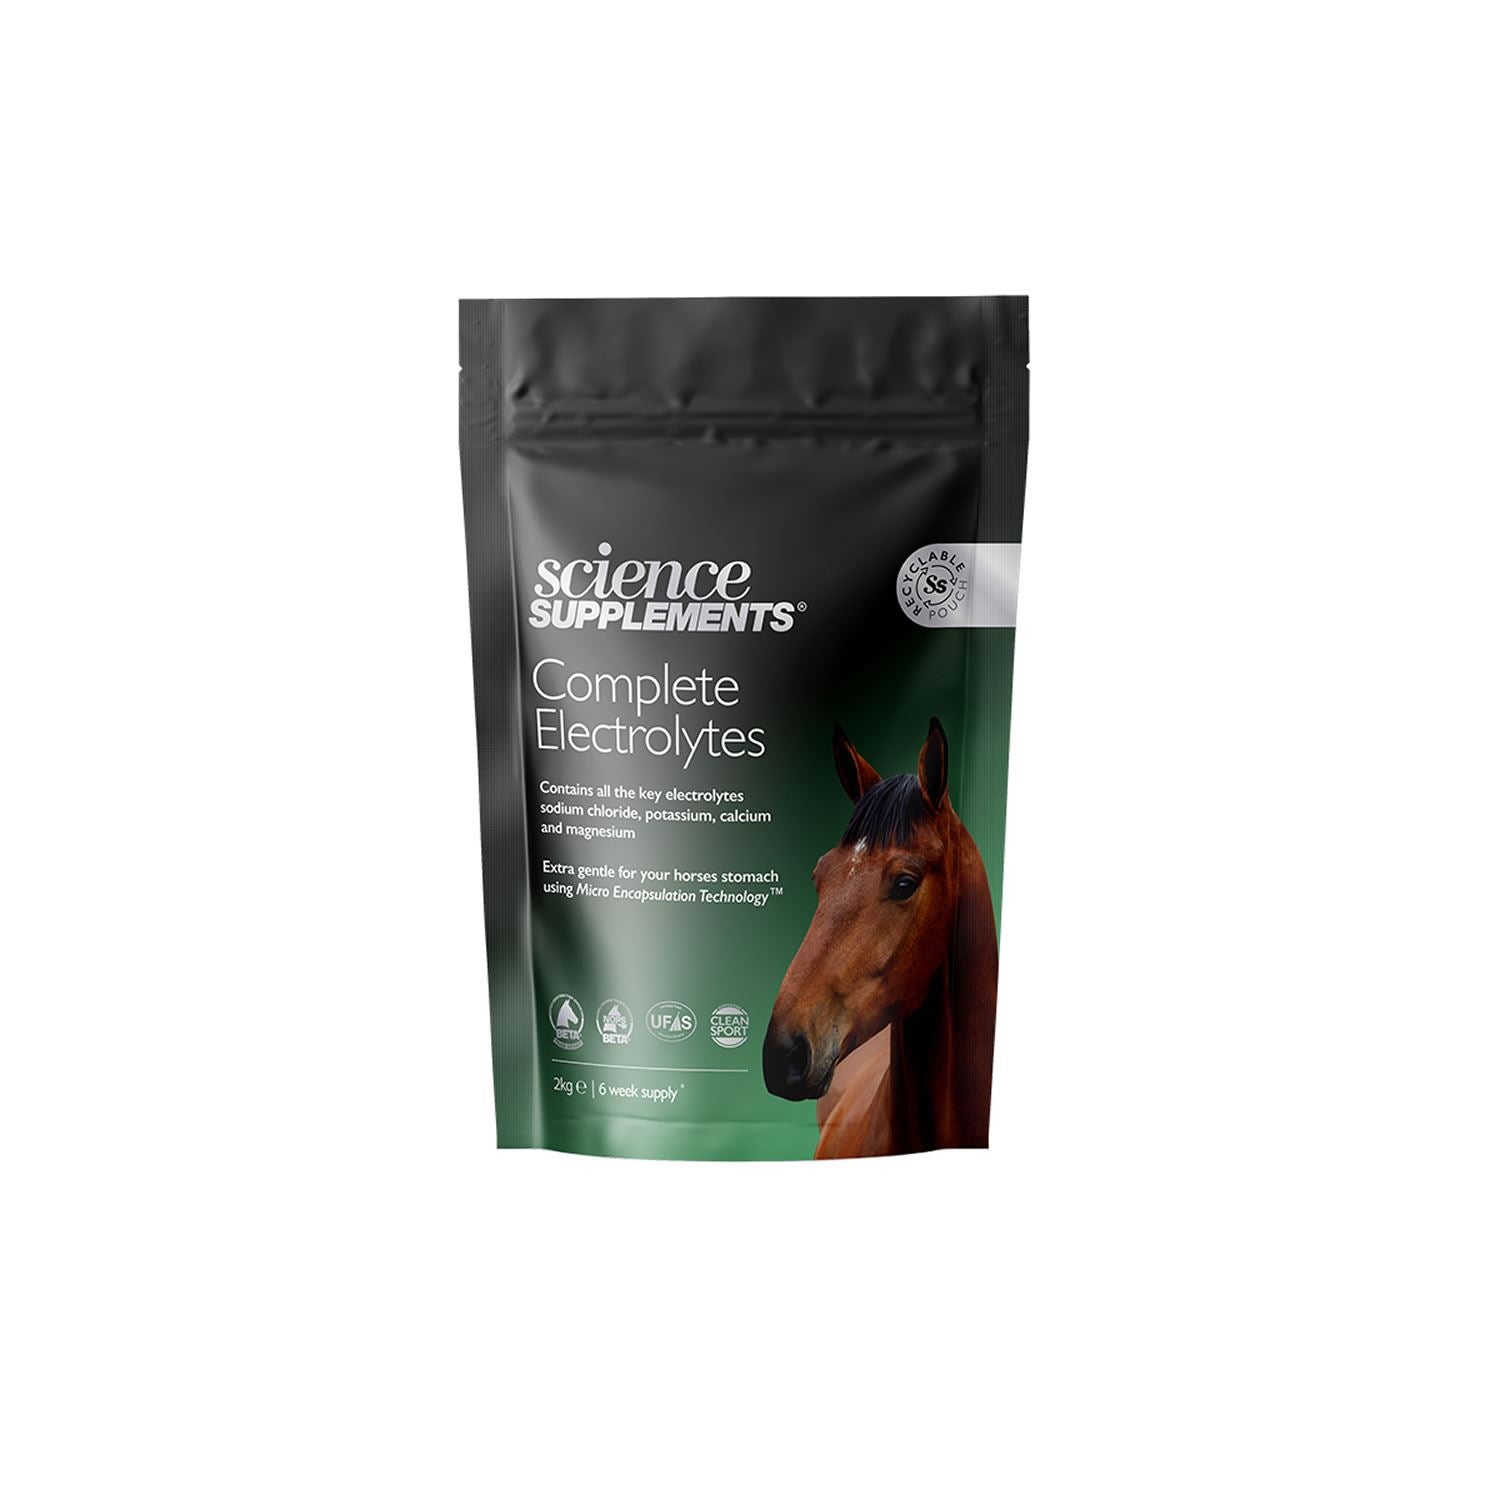 Science Supplements Complete Electrolytes - Just Horse Riders